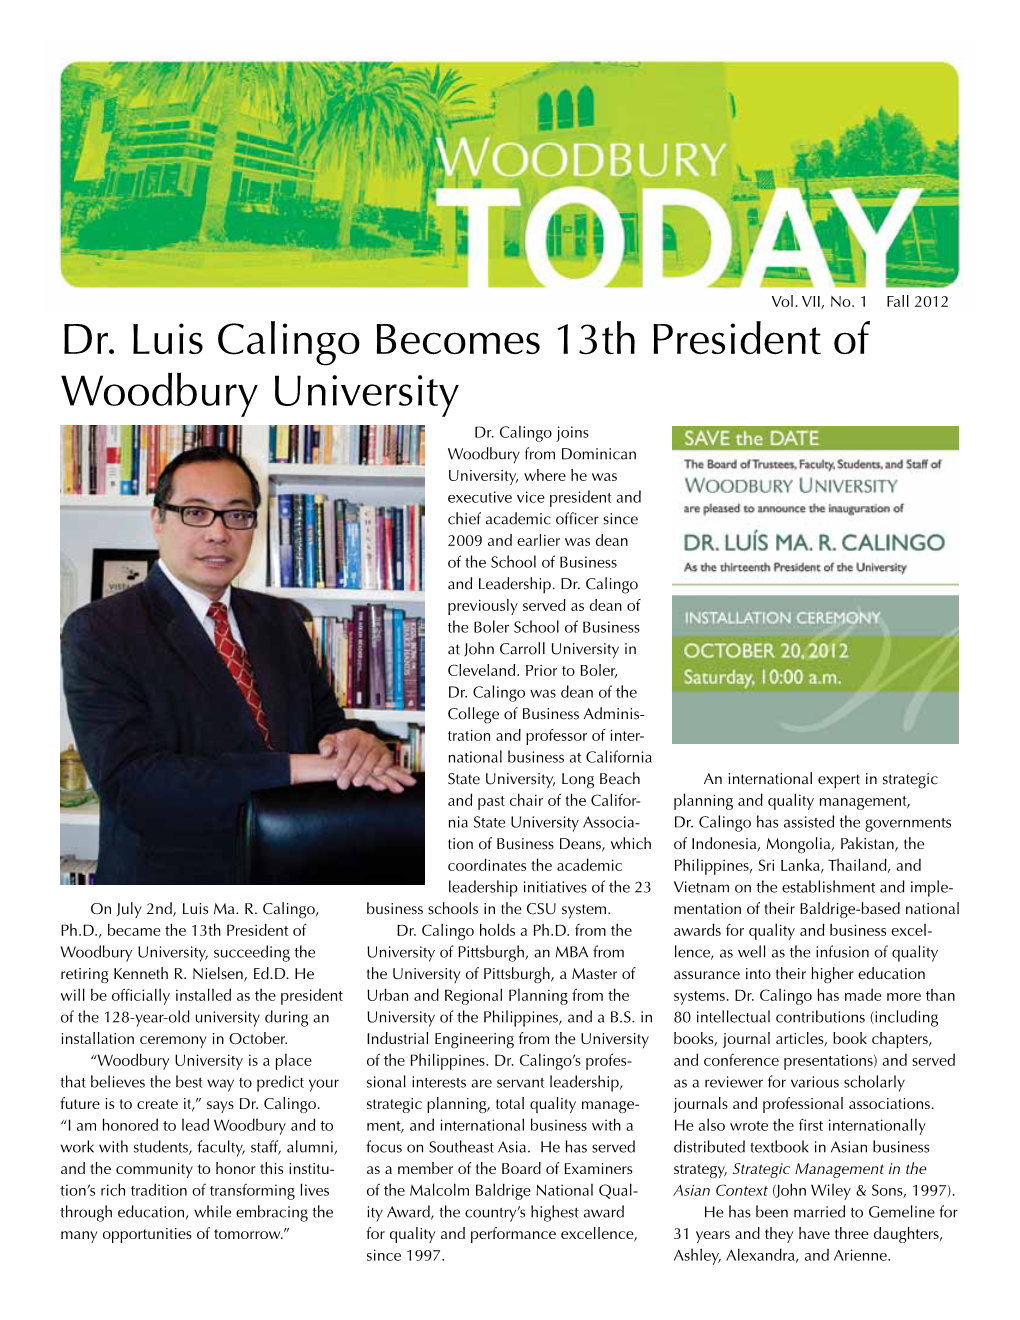 Dr. Luis Calingo Becomes 13Th President of Woodbury University Dr